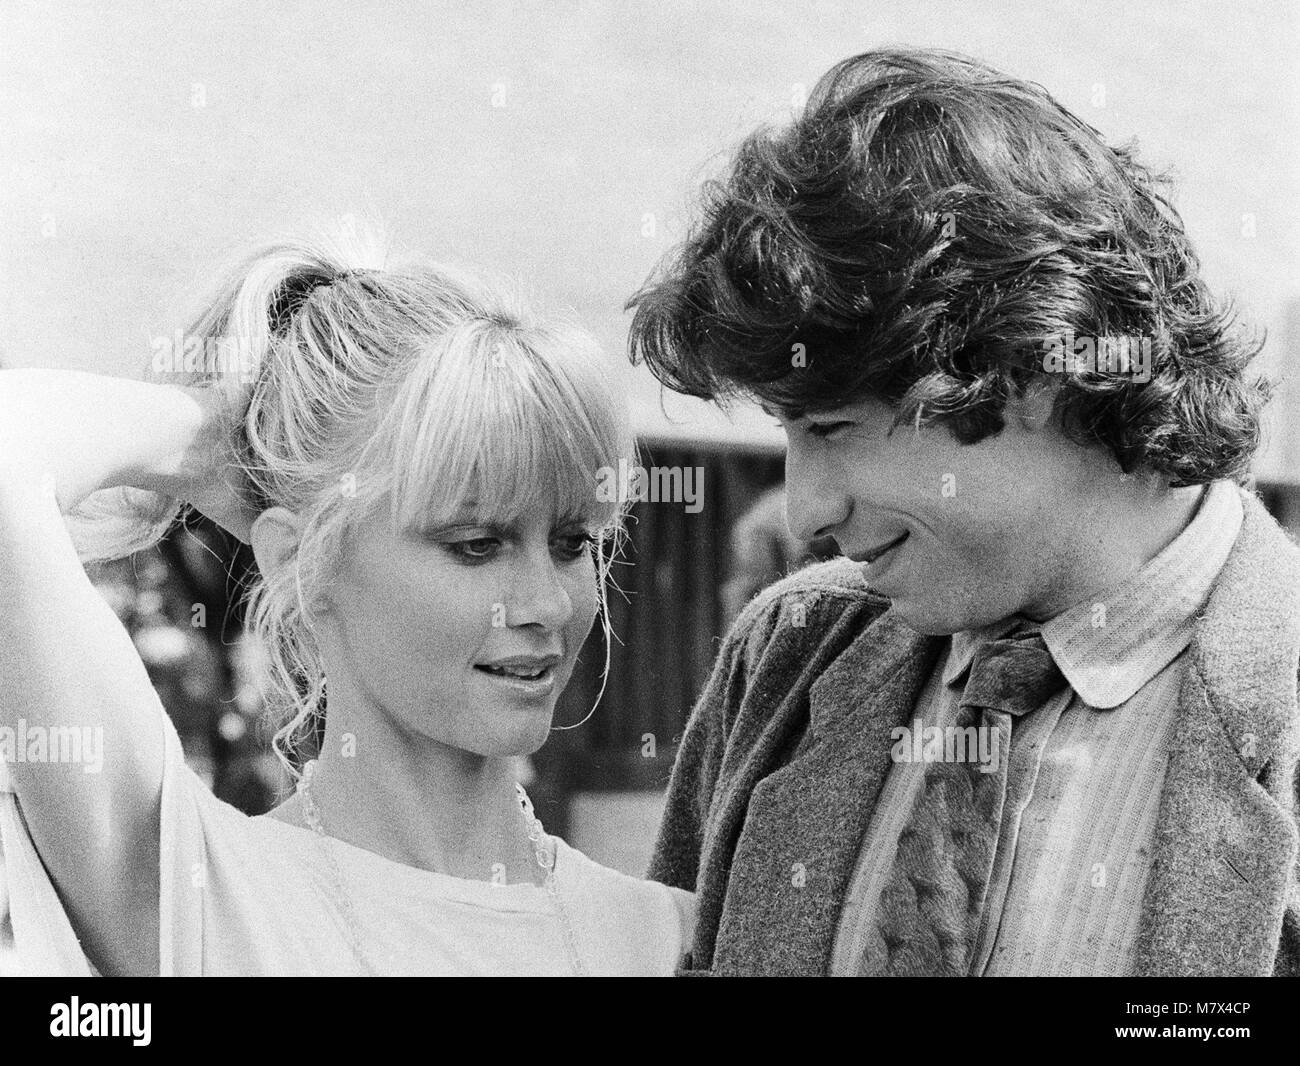 John Travolta and his co star Olivia Newton John in England during the week of release of the film Grease.  Grease was released in the UK on 14th September 1978.  Grease is a 1978 American musical romantic comedy film based on Jim Jacobs and Warren Casey's musical of the same name. The film depicts the life of Rydell High School students Danny Zuko and Sandy Olsson in the late 1950s.  Directed by Randal Kleiser and written by Bronte Woodard, the film stars John Travolta as Danny, Olivia Newton-John as Sandy and Stockard Channing as Betty Rizzo. Grease was successful both critically and commerc Stock Photo